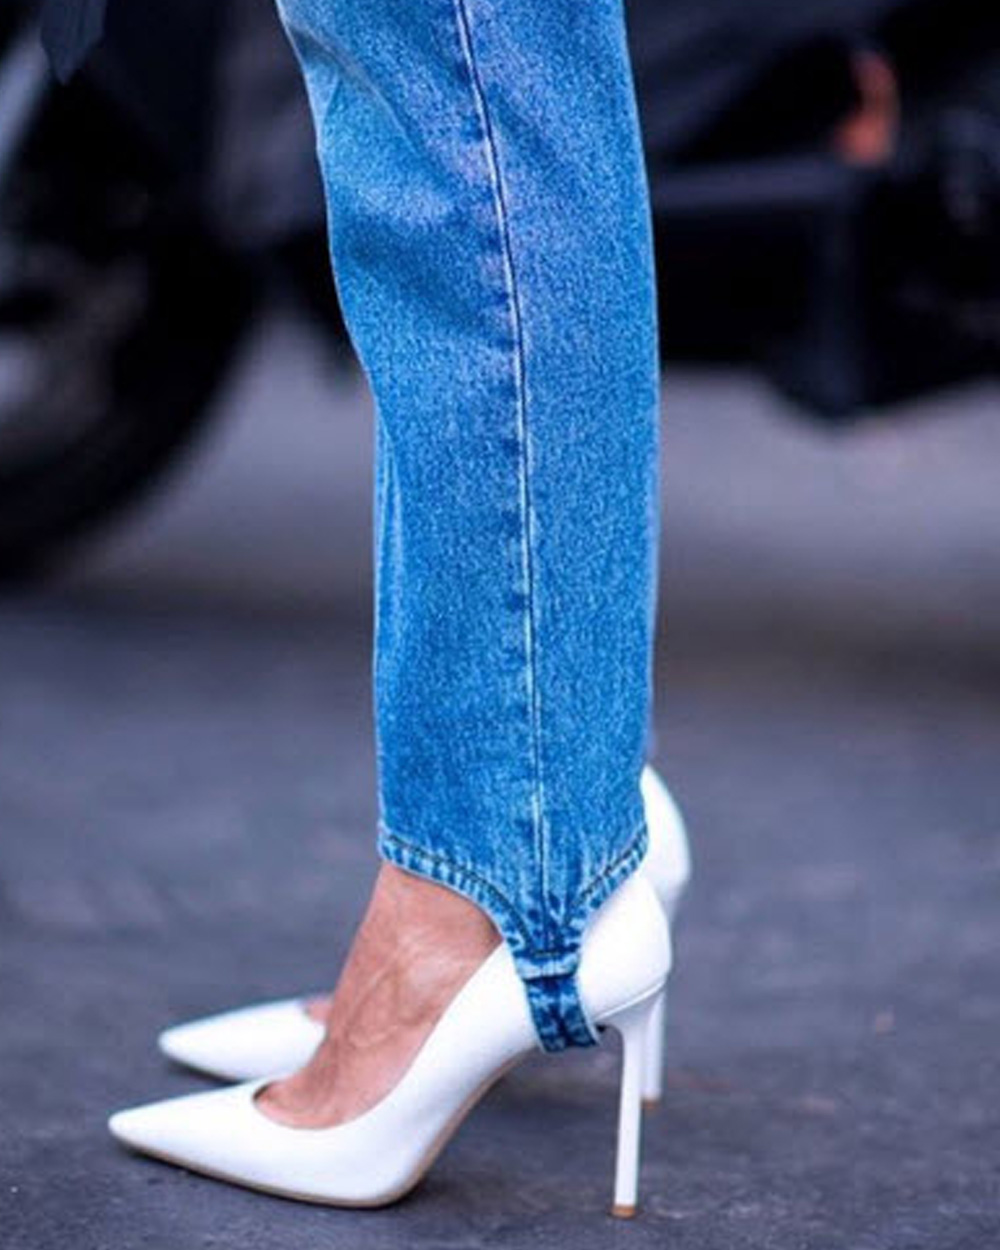 Why the Stirrup Pant is Making a Fashionable Comeback